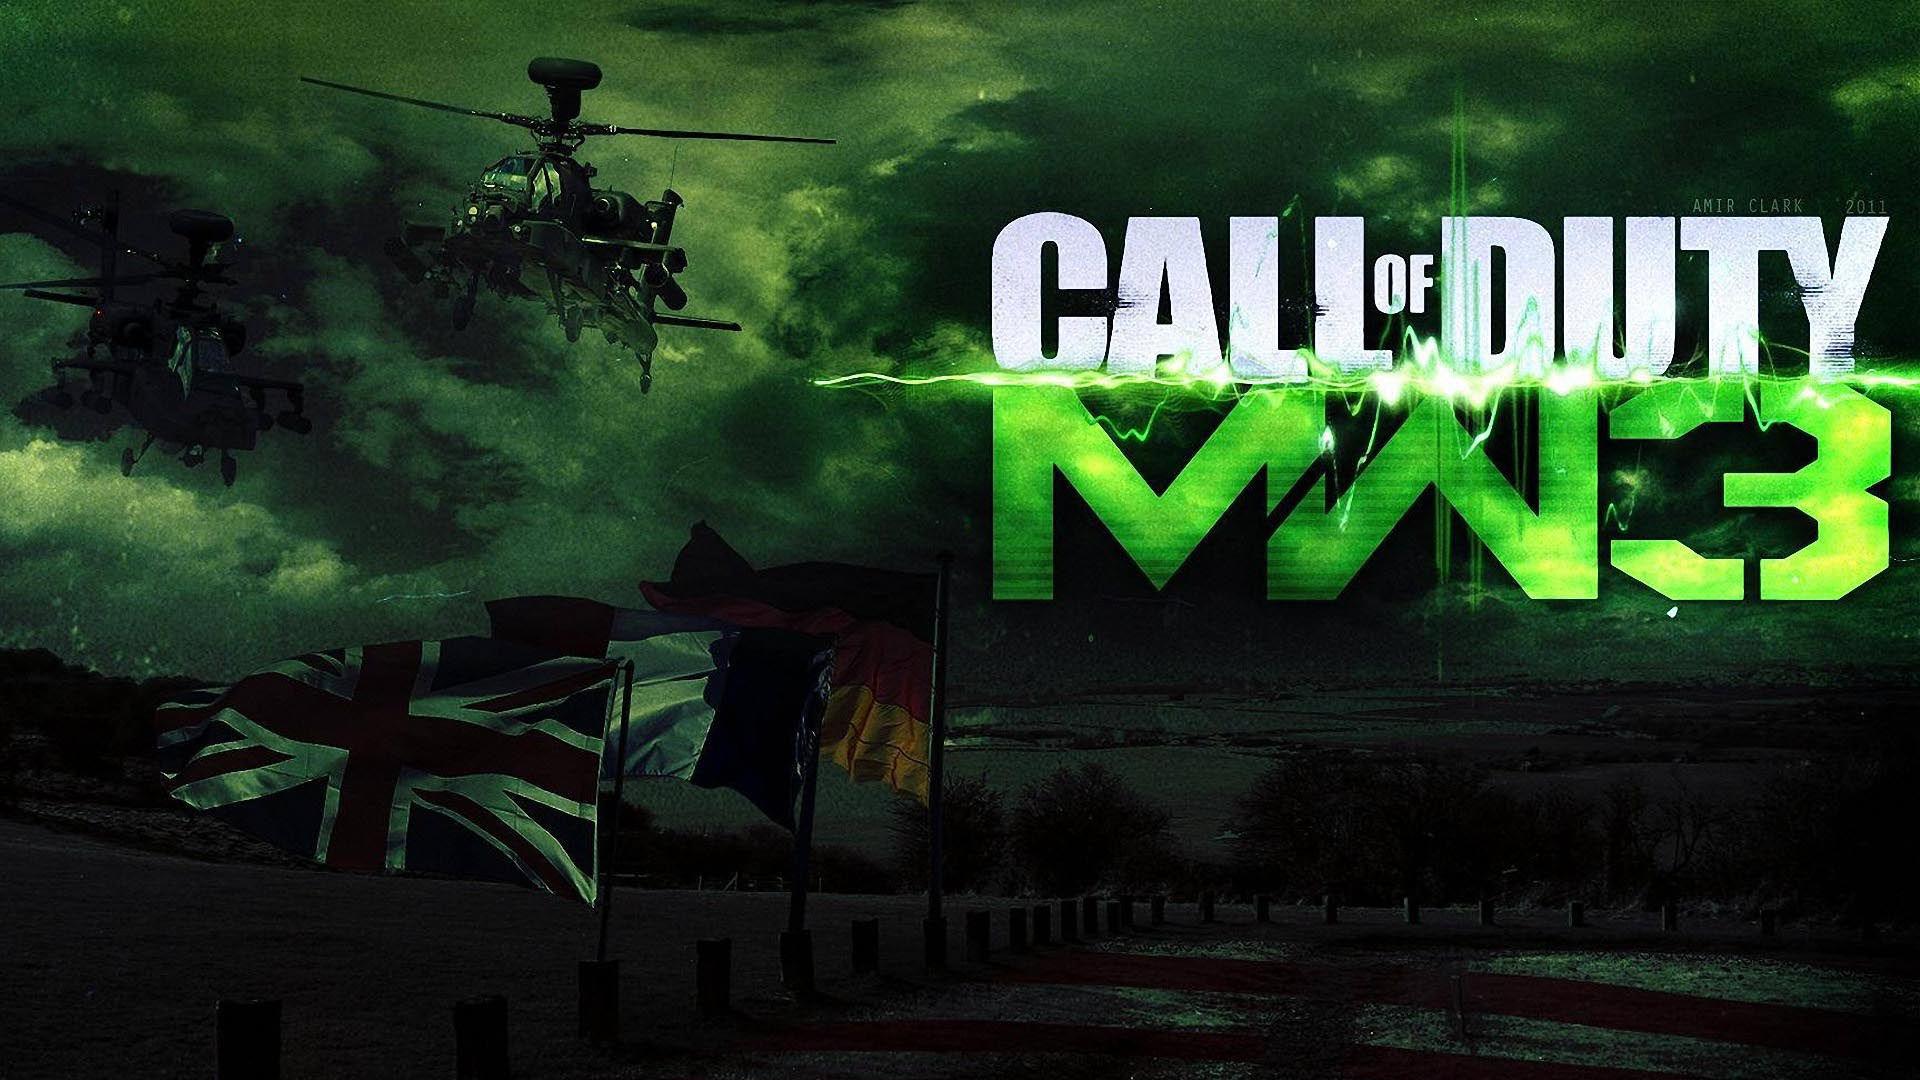 call of duty mw3 wallpaper hd 1080pCall Of Duty Wallpaper 1080p 1920